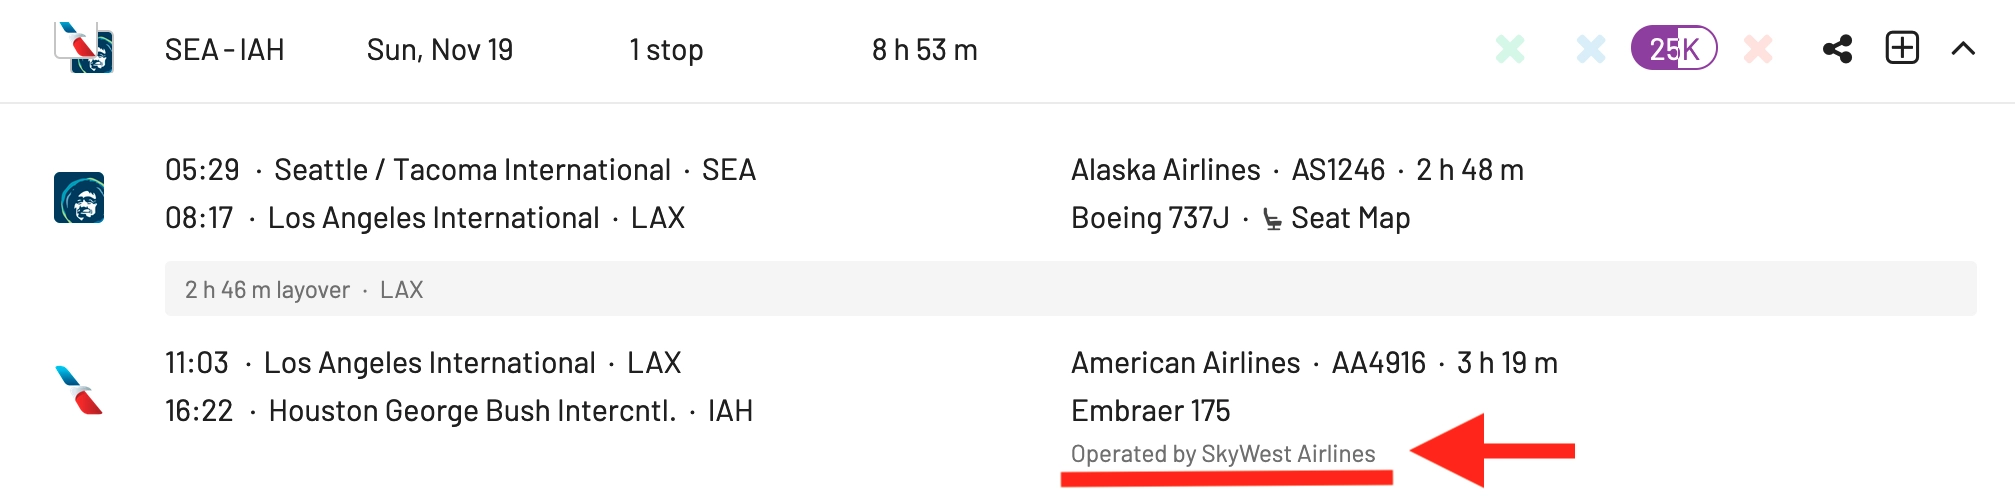 AwardFares now shows Operated By when the flight is performed by a subsidiary airline (American).